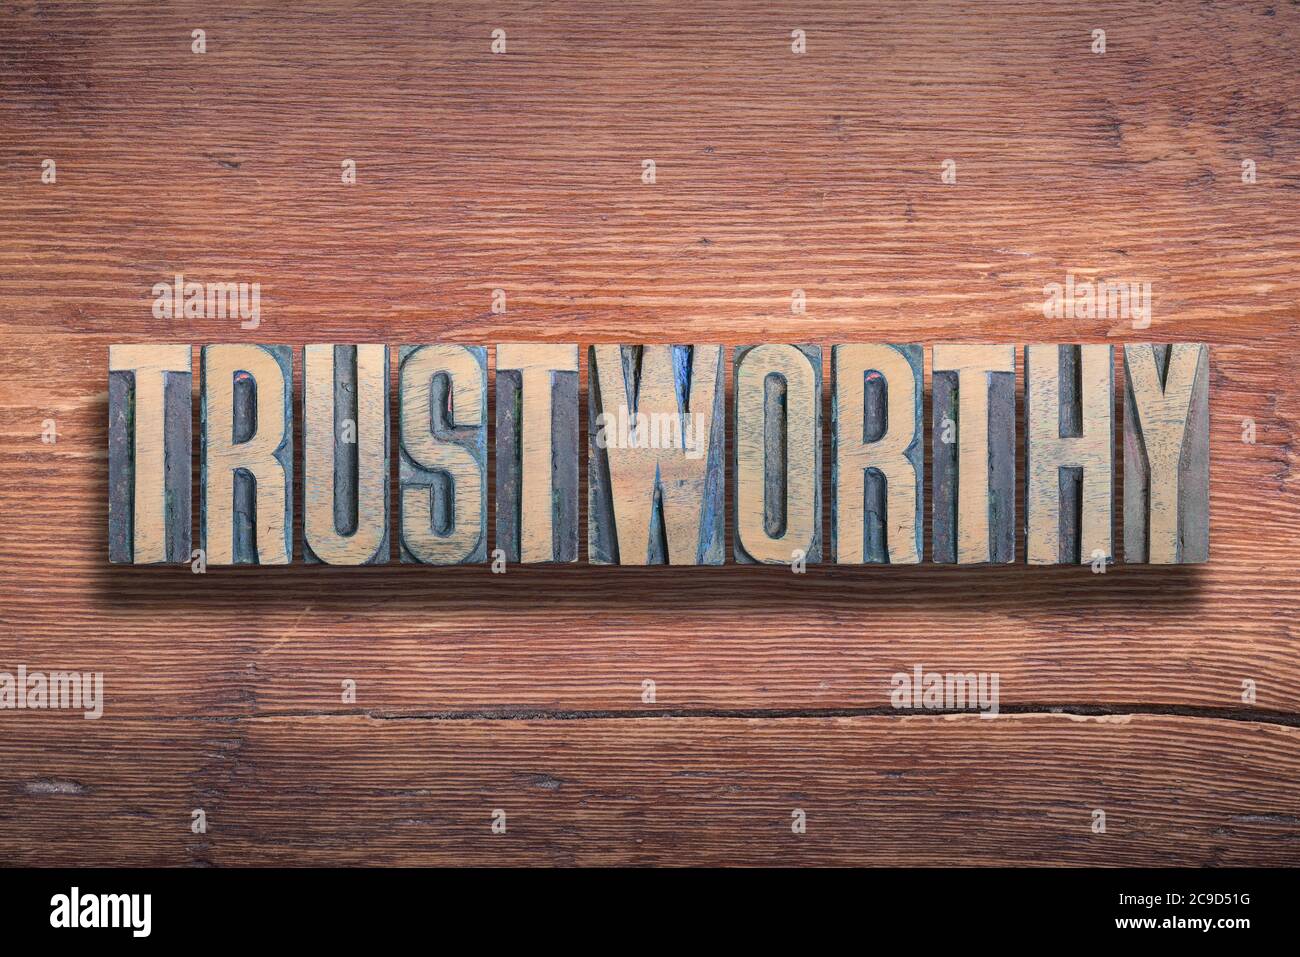 trustworthy word combined on vintage varnished wooden surface Stock Photo